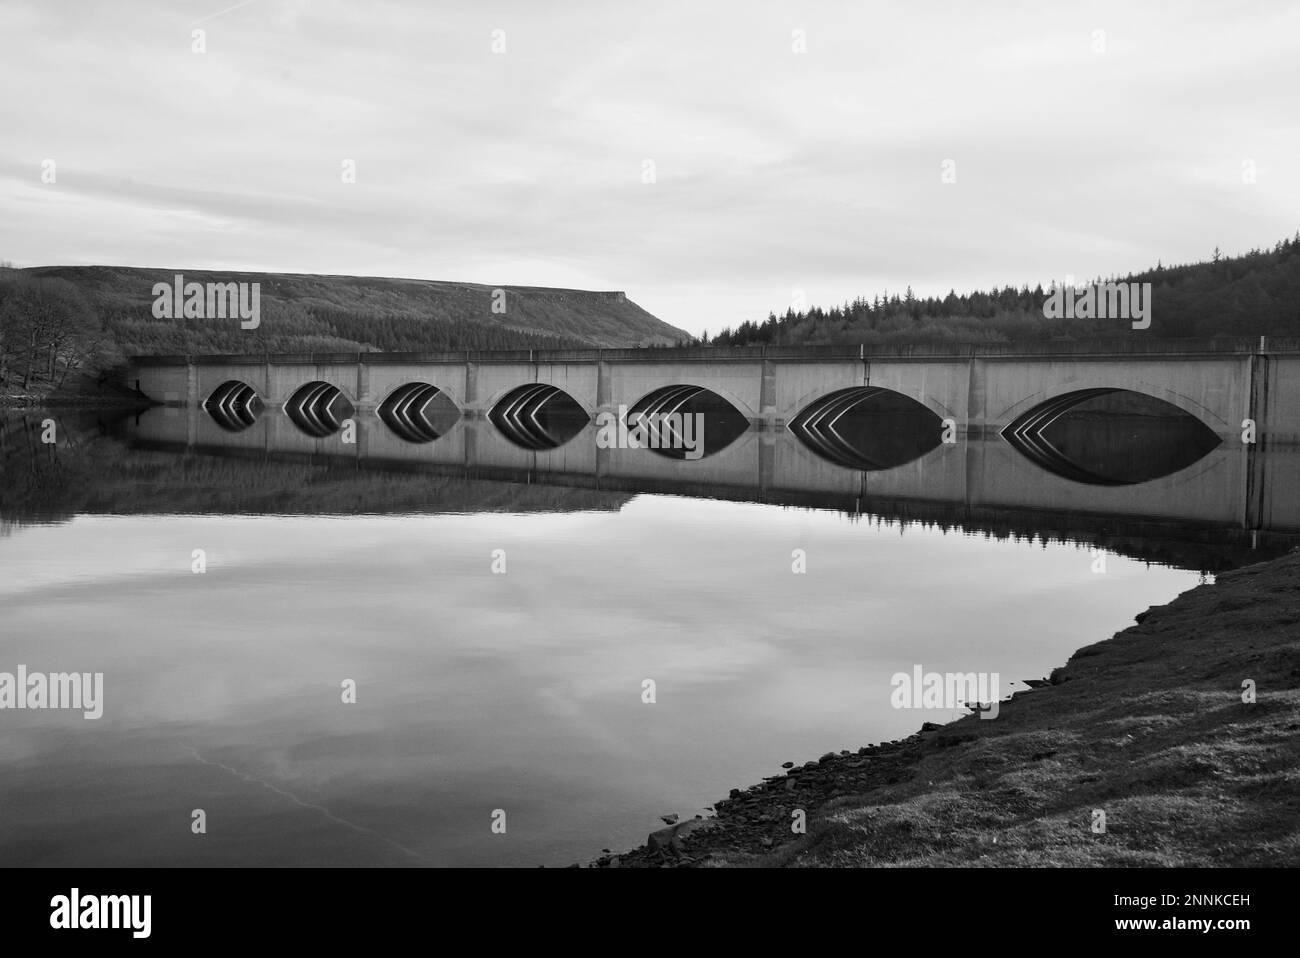 Ashopton Viaduct- A viaduct bridge supporting part of Snake Road (Snakes Pass) at Ladybower Reservoir, Peak District, Derbyshire, UK. Stock Photo